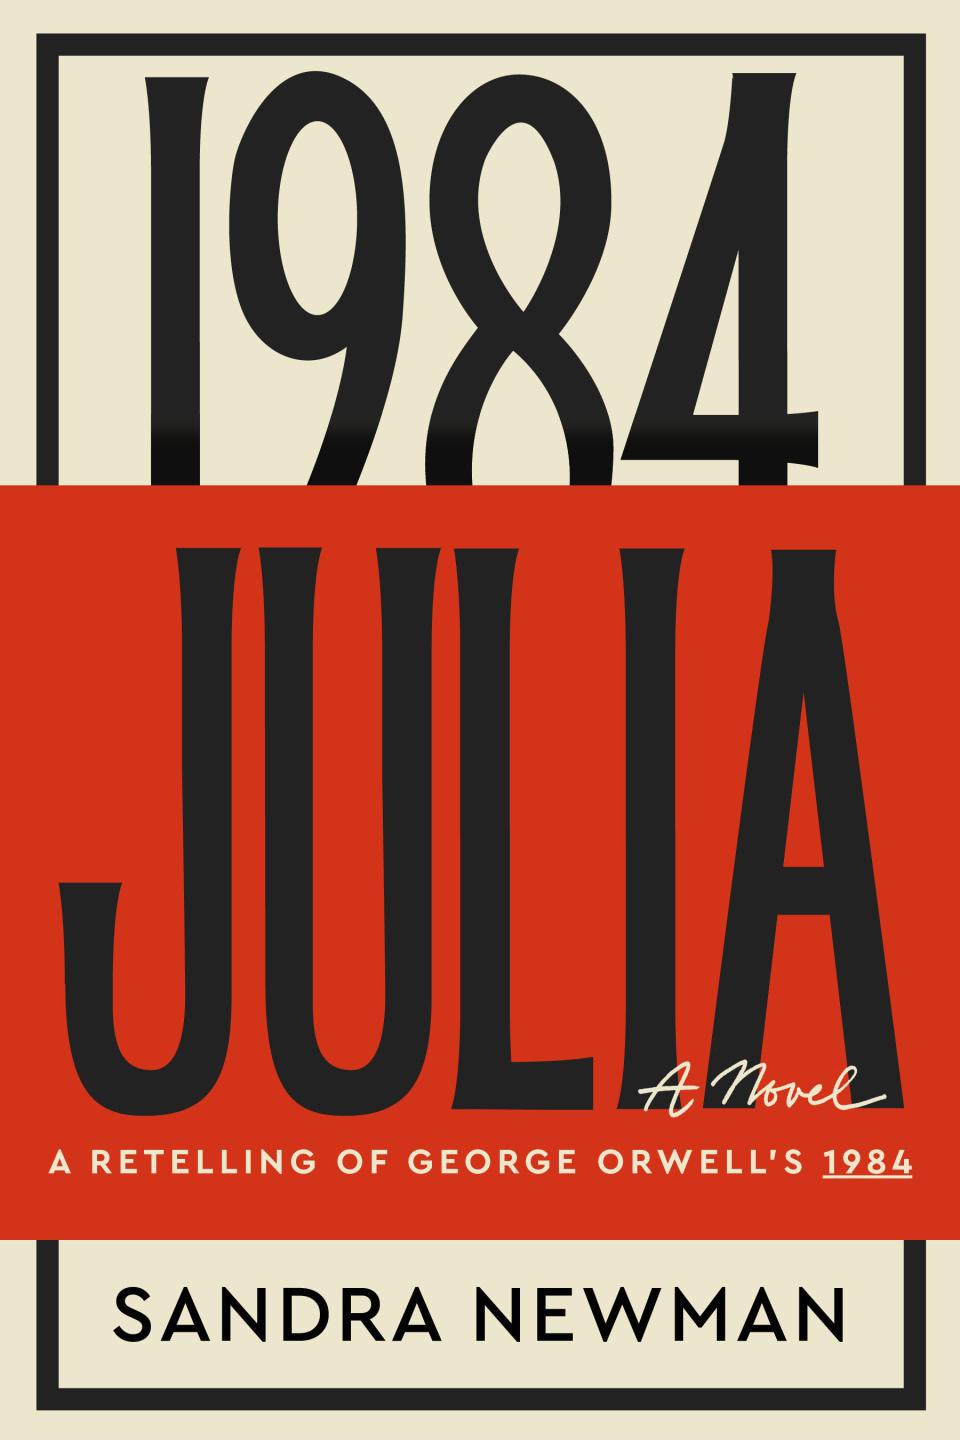 This book cover image released by Mariner Books shows "Julia," a retelling of George Orwell's "1984," by Sandra Newman. (Mariner Books via AP)